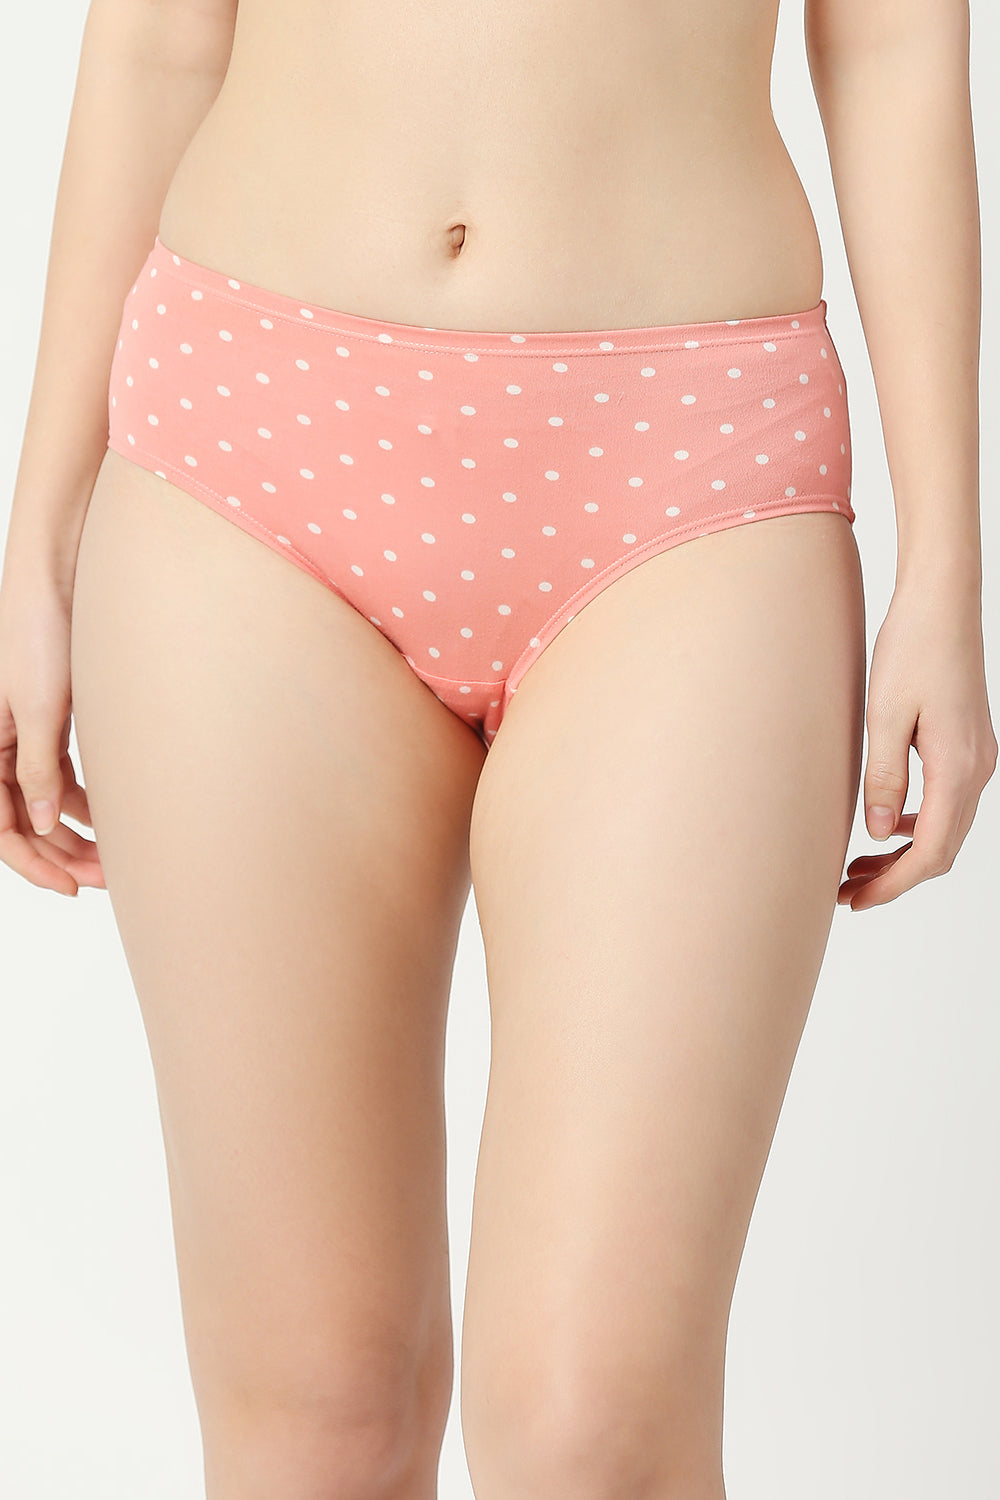 Red Rose Cotton Comfort Medium Rise, Full Coverage Hipster Panties - Multicolor Pack of 3